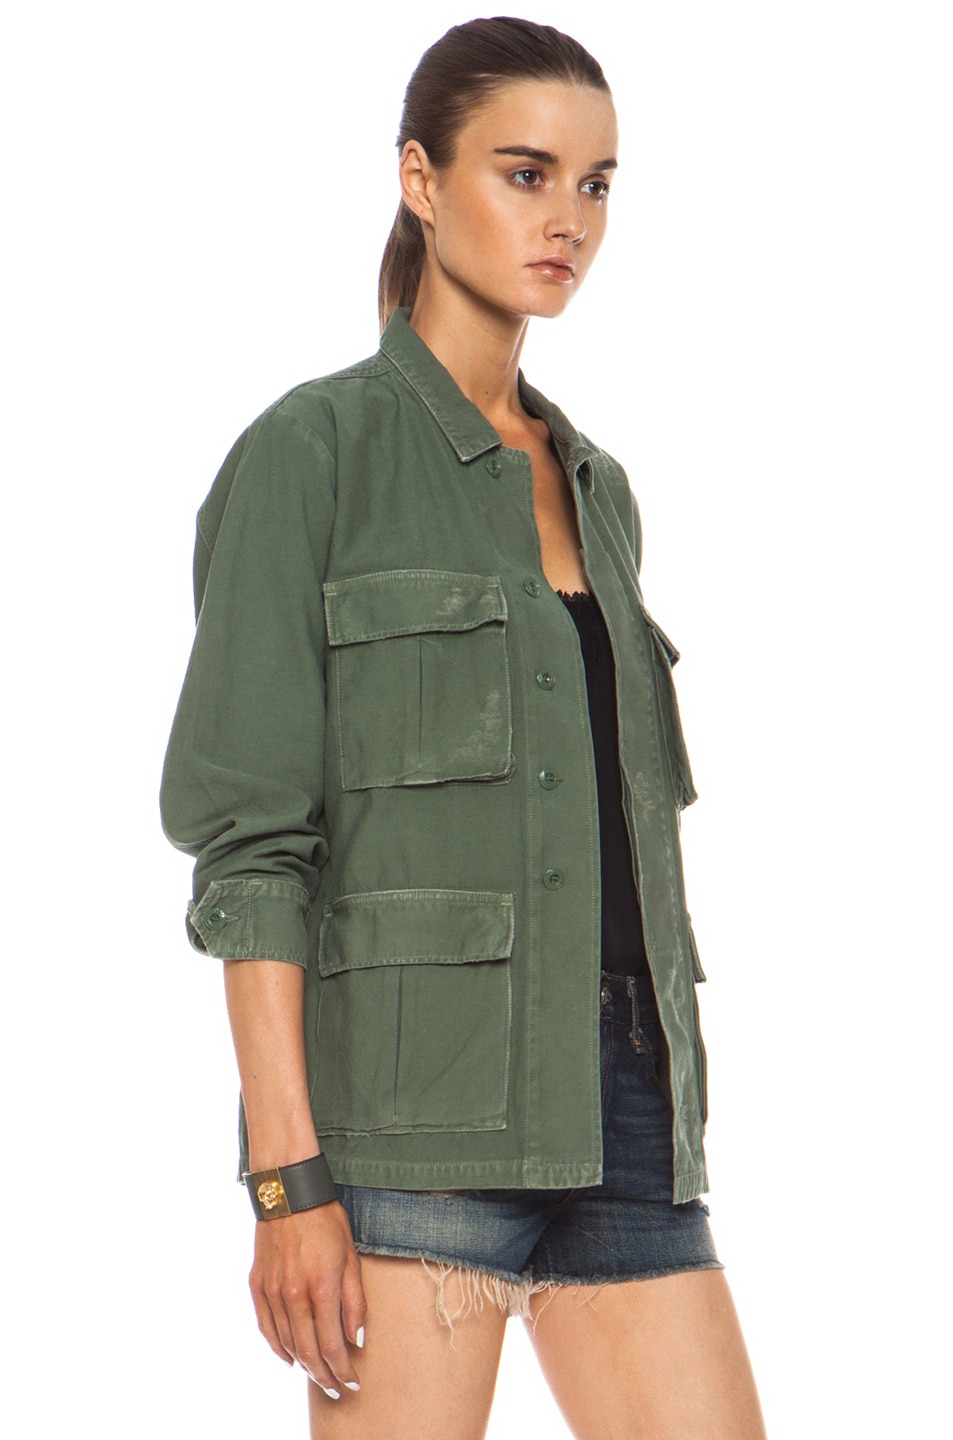 Citizens of Humanity Kyle Military Jacket in Fatigue | FWRD